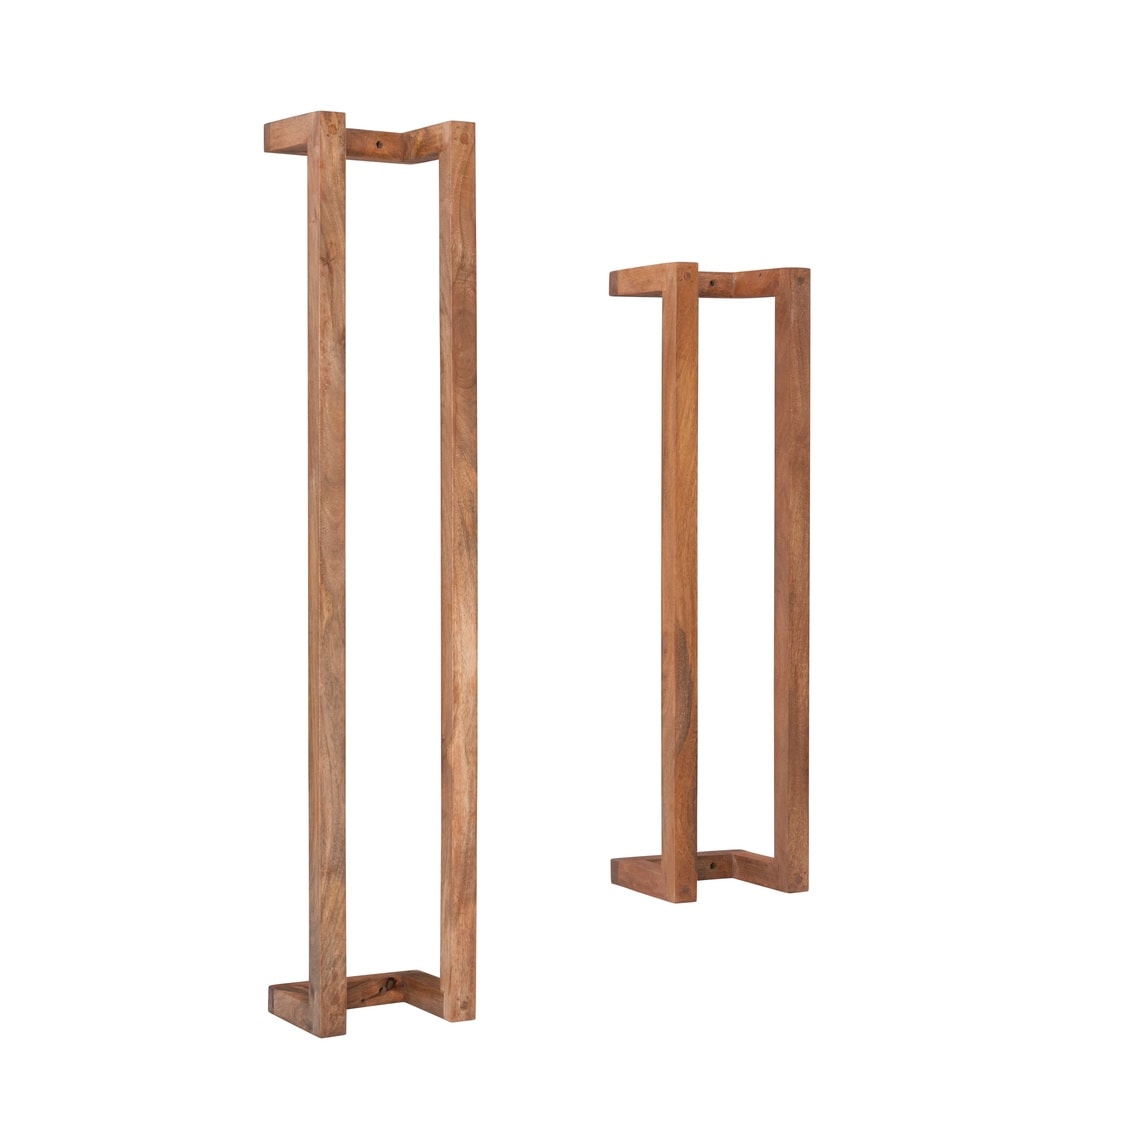 https://ak1.ostkcdn.com/images/products/is/images/direct/66a5d9a3ebdb34213fbb375d4607d488df01a300/Twombly-Wooden-Towel-Rack-%28Set-of-2%29.jpg